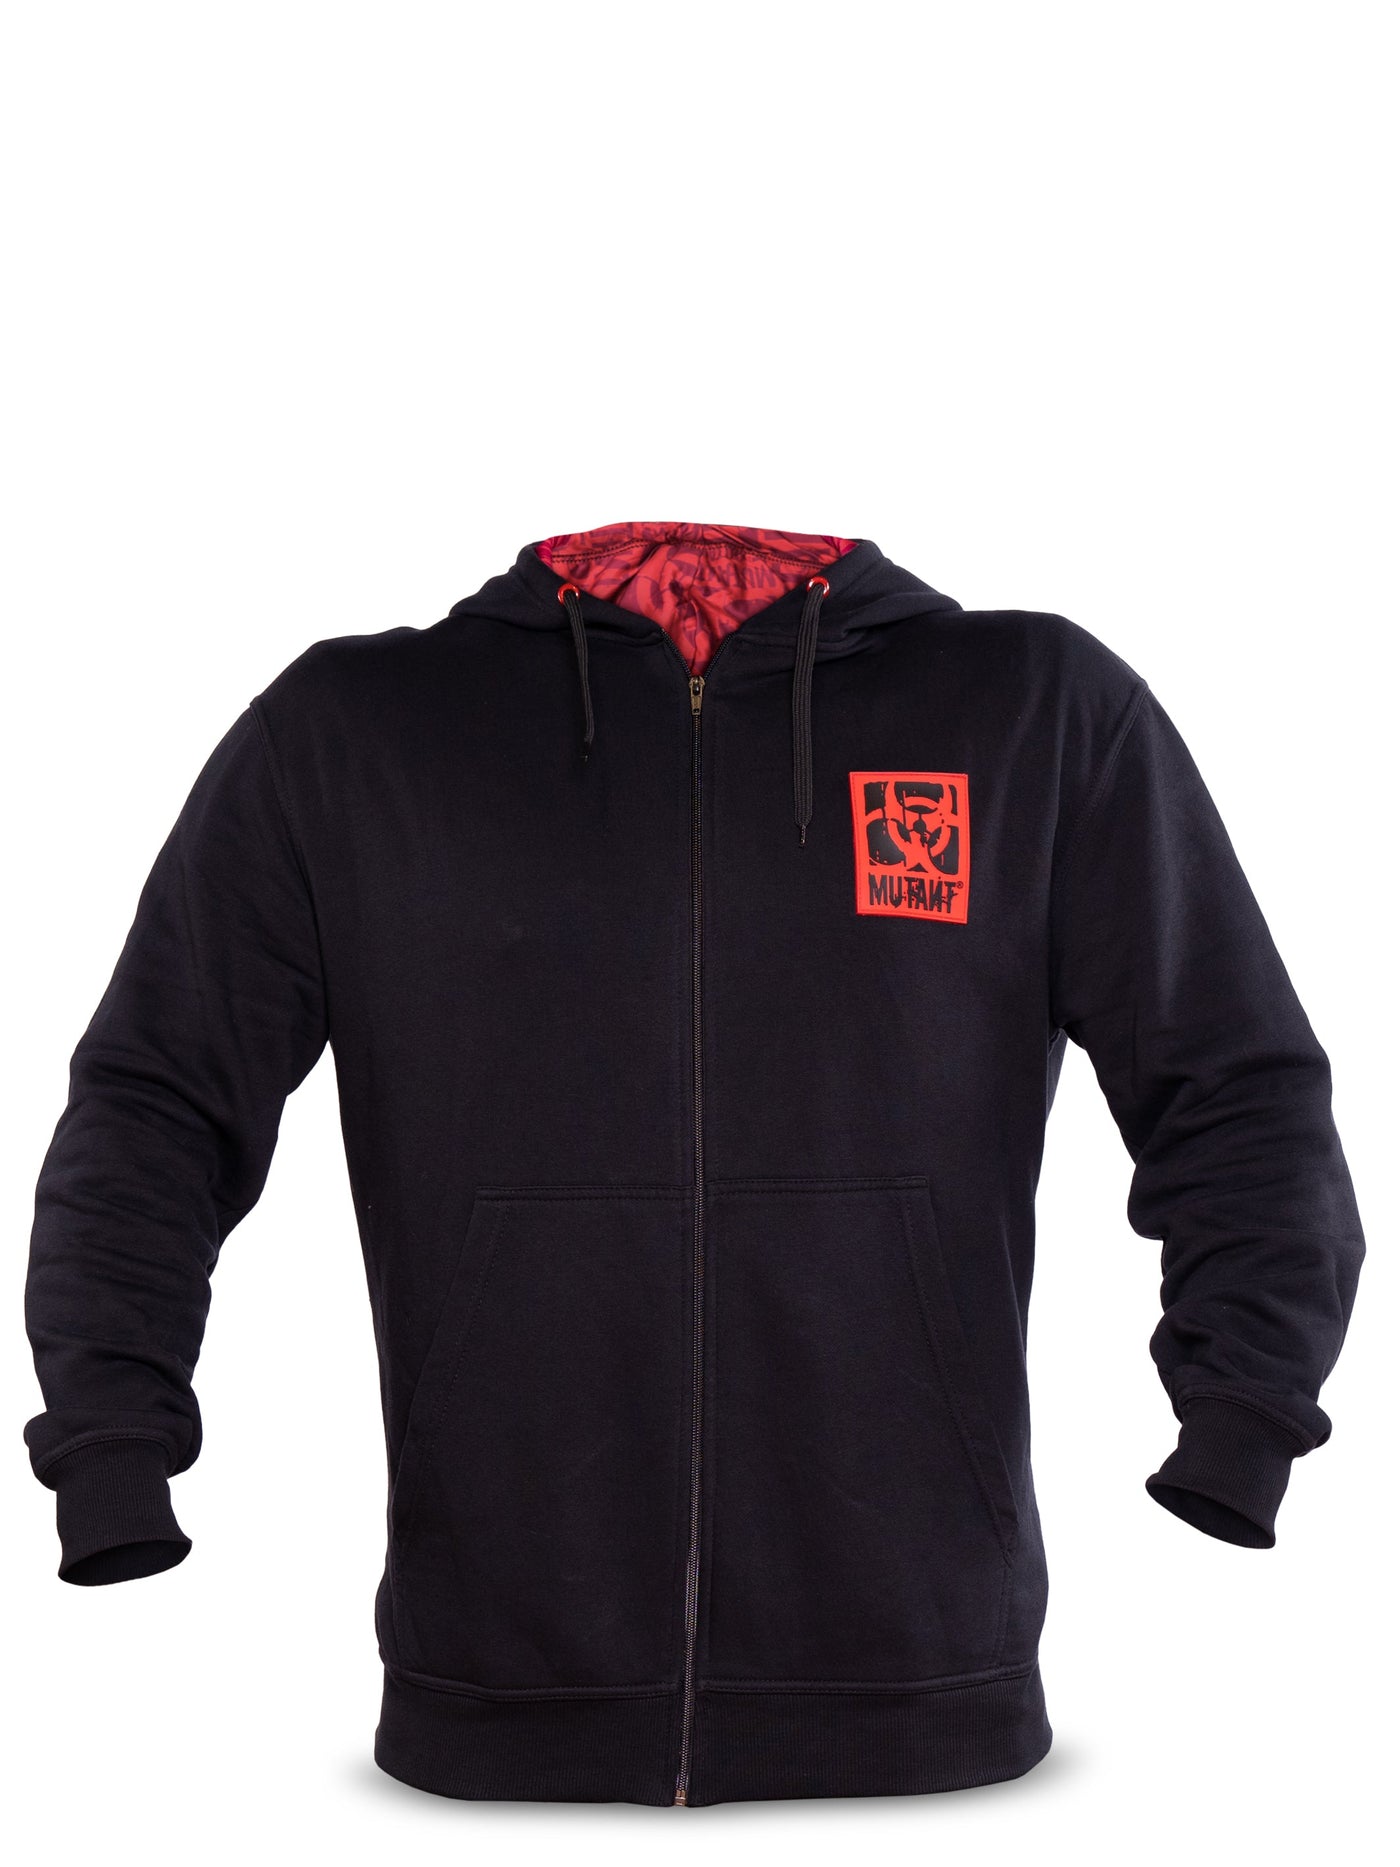 Front view of Black Mutant Patched Zip-Up Gym Hoodie with red and black logo patch on the left chest, two pockets, and red internal hood lining with red watermarked Mutant logo. White background.